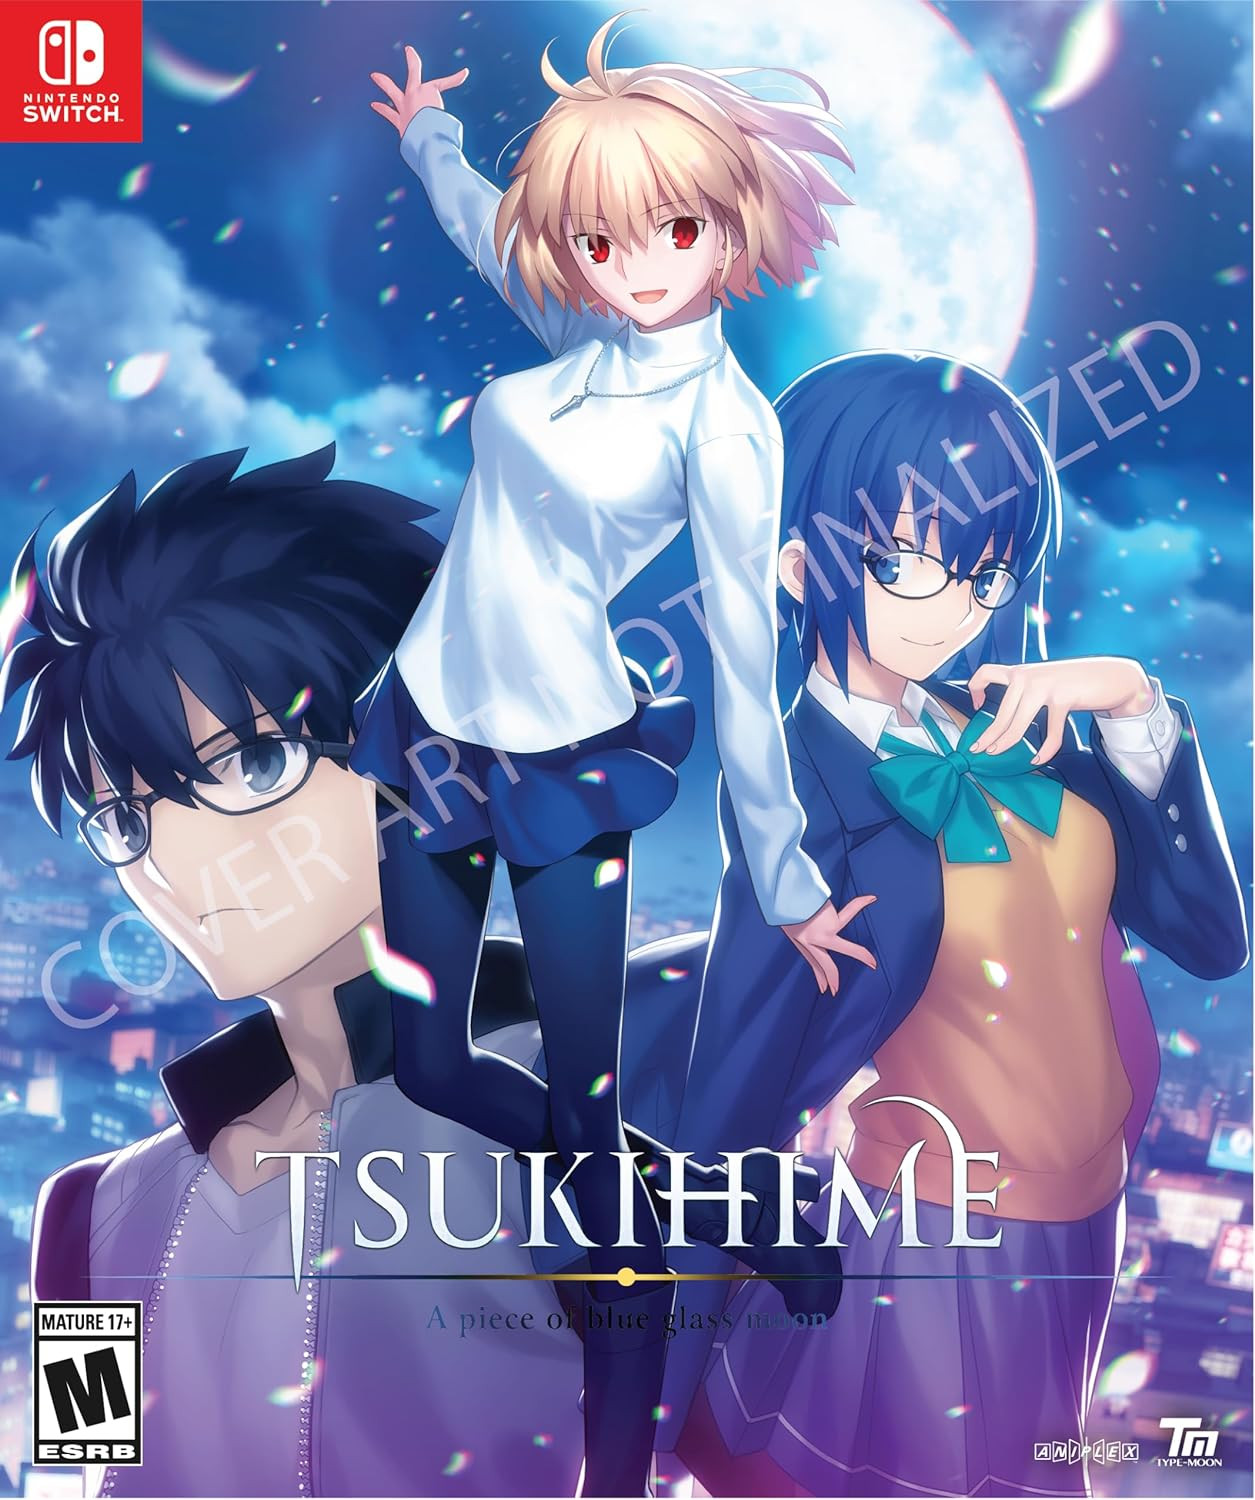 Tsukihime a Piece of Blue Glass Moon Limited Edition - Nintendo Switch